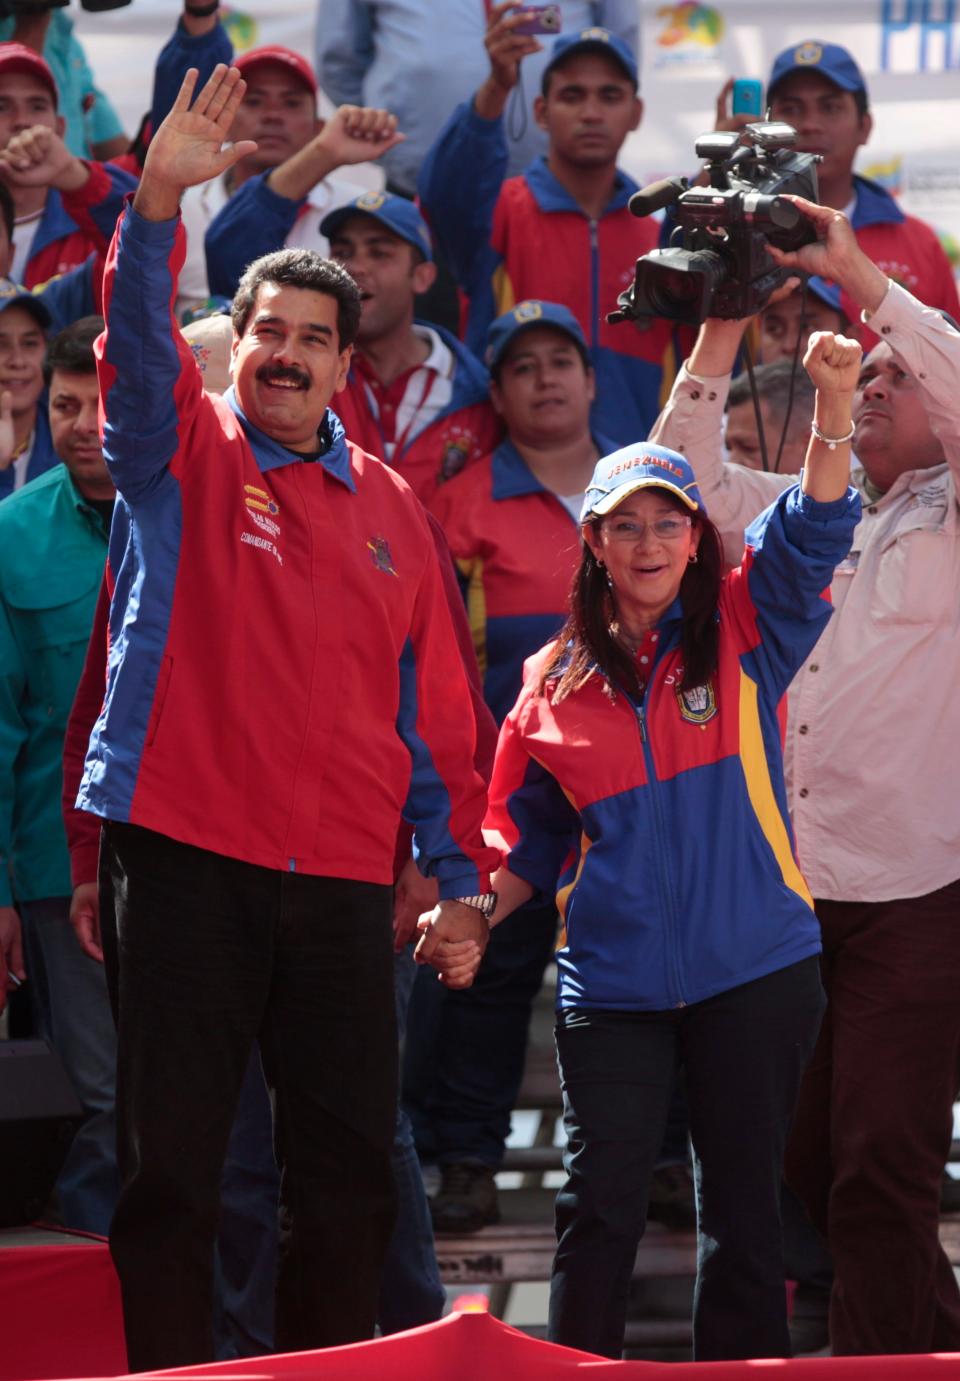 Venezuela's President Nicolas Maduro and his wife Cilia Flores greet supporters upon their arrival for a meeting with students in Caracas, Venezuela, Saturday, March 22, 2014. Two more people were reported dead in Venezuela as a result of anti-government protests even as supporters and opponents of Maduro took to the streets on Saturday in new shows of force. (AP Photo/Esteban Felix)